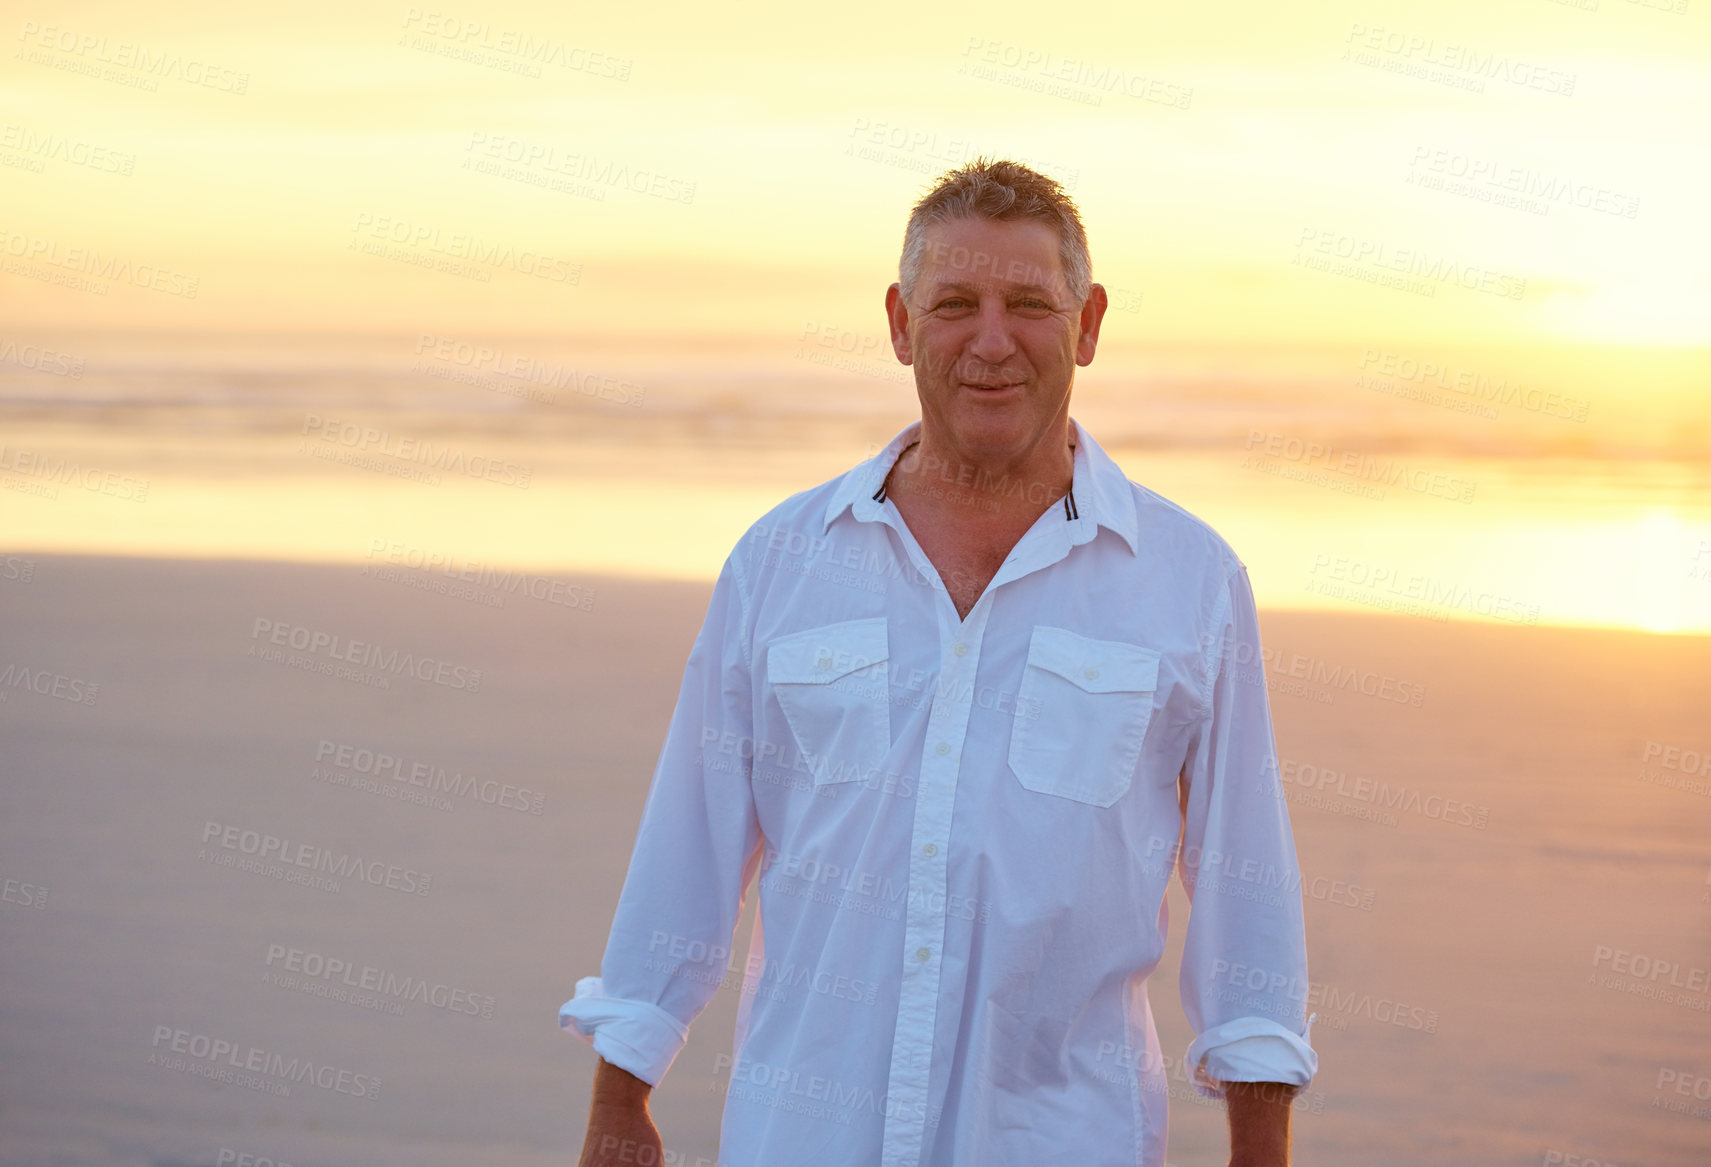 Buy stock photo Shot of mature man standing on the beach at sunset